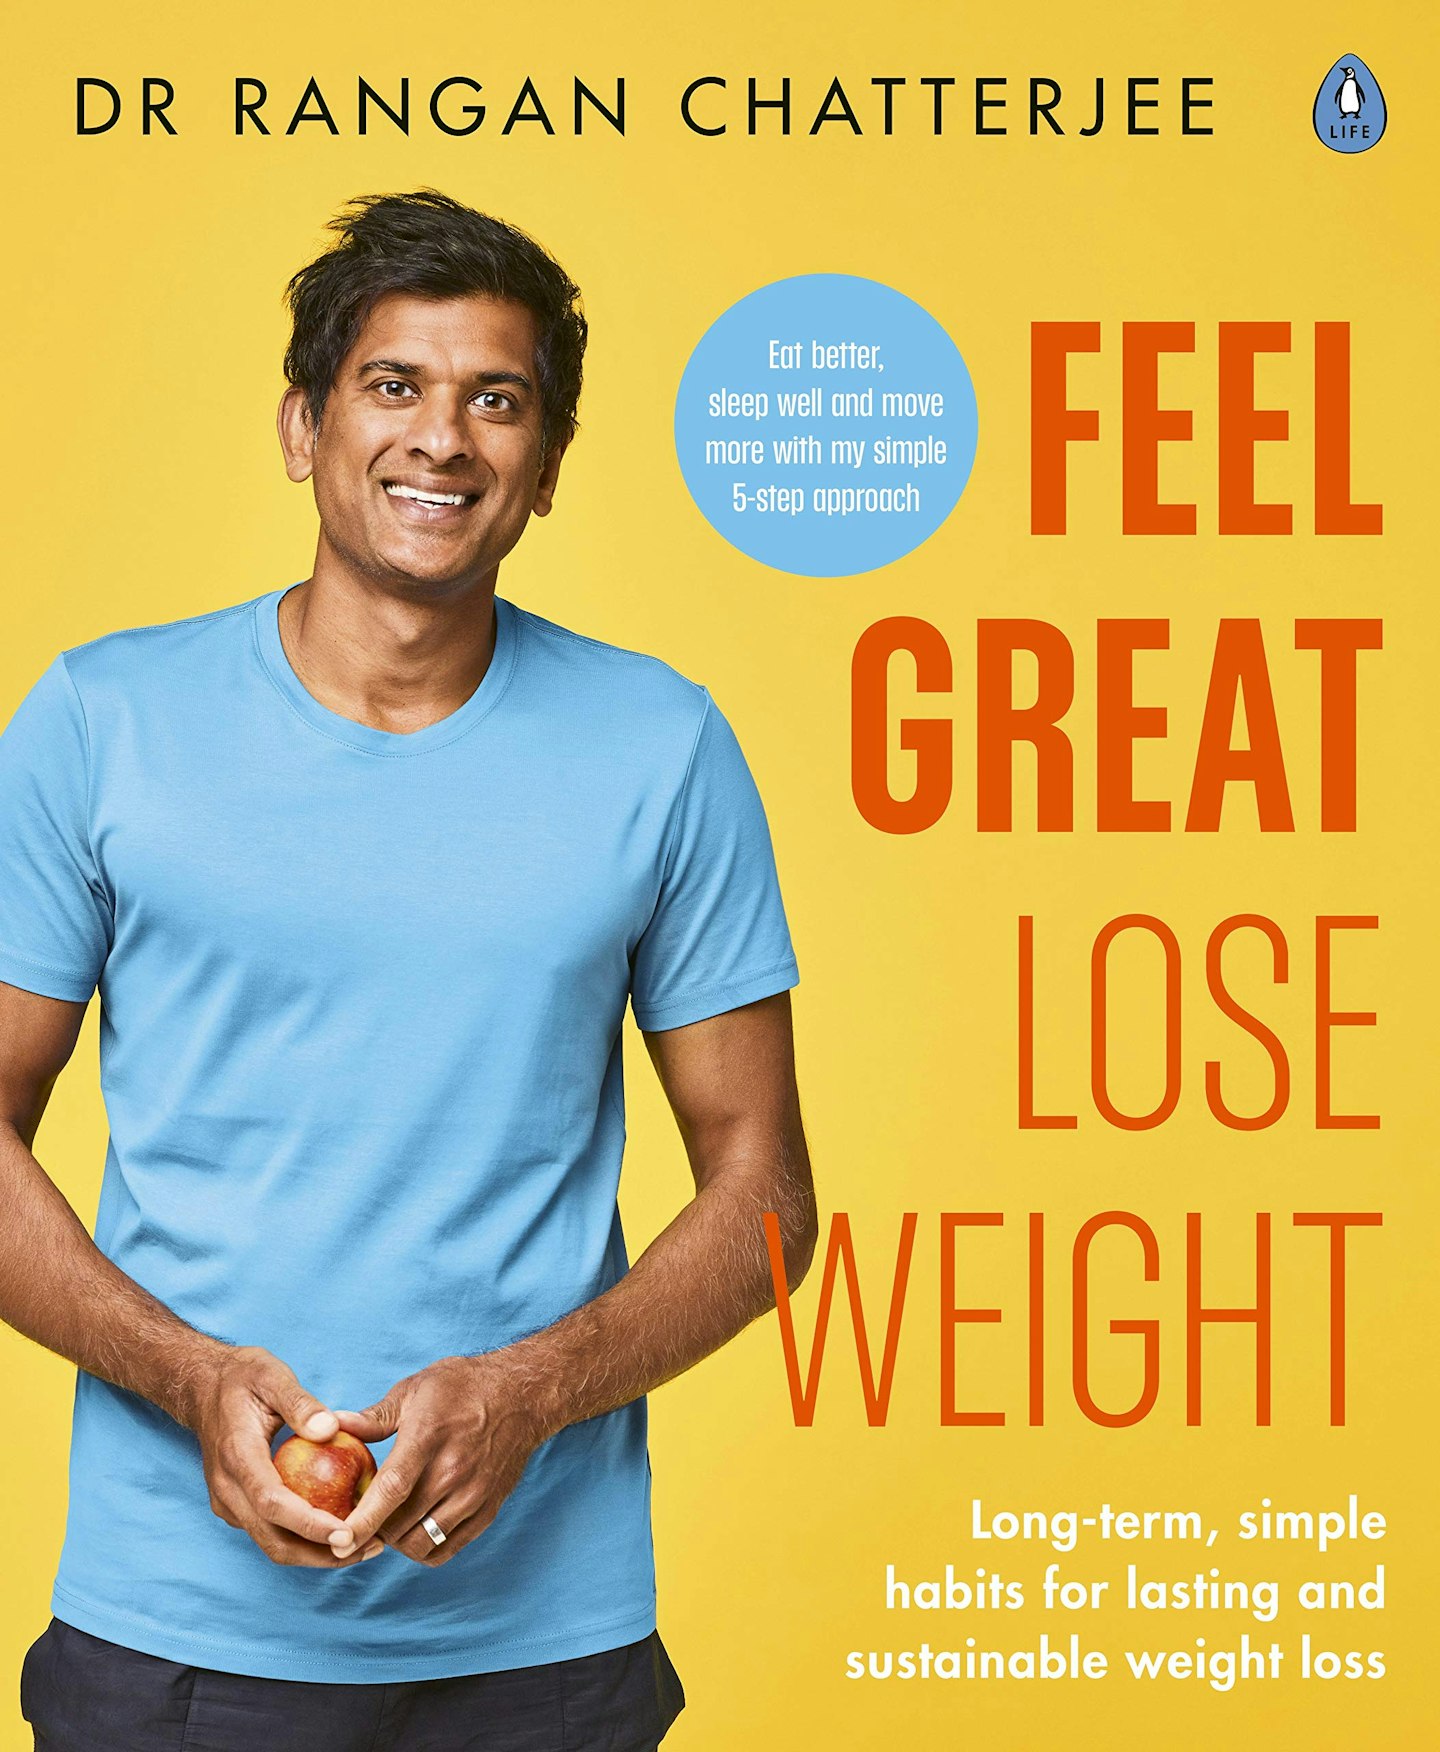 Feel Great Lose Weight: Long Term, Simple Habits for Lasting and Sustainable Weight Loss by Dr Rangan Chatterjee